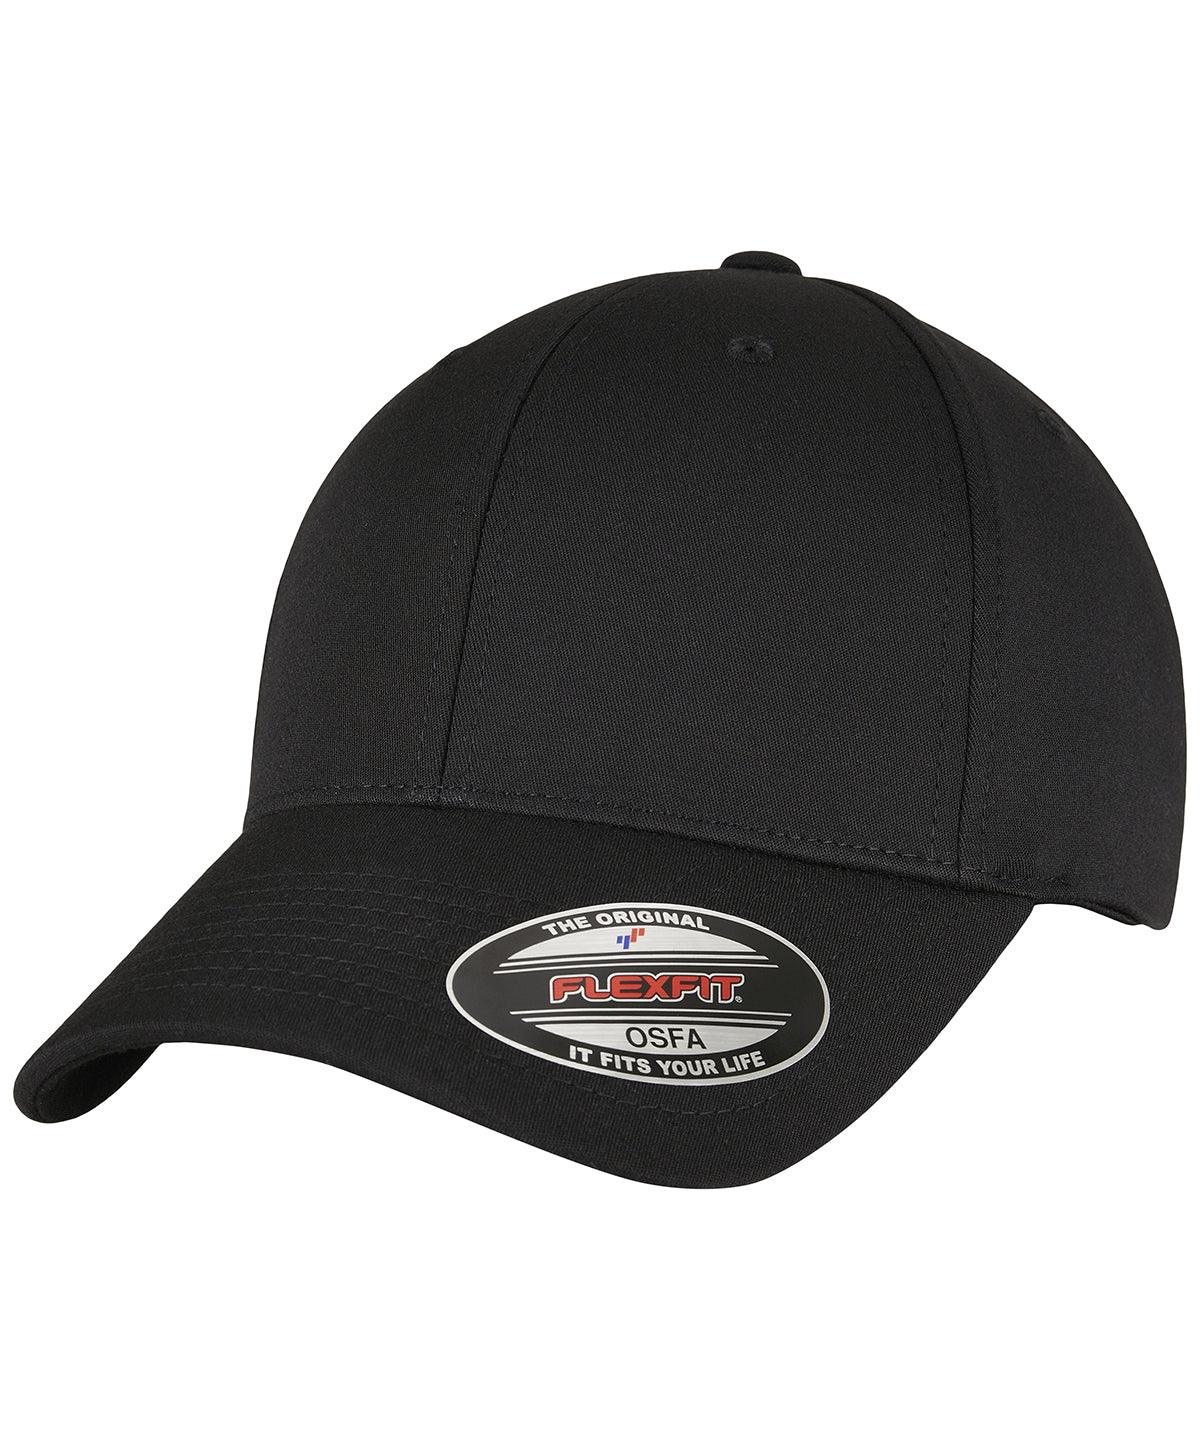 Black - Alpha shape flexfit (6277AS) Caps Flexfit by Yupoong Headwear, New For 2021, New Styles For 2021 Schoolwear Centres